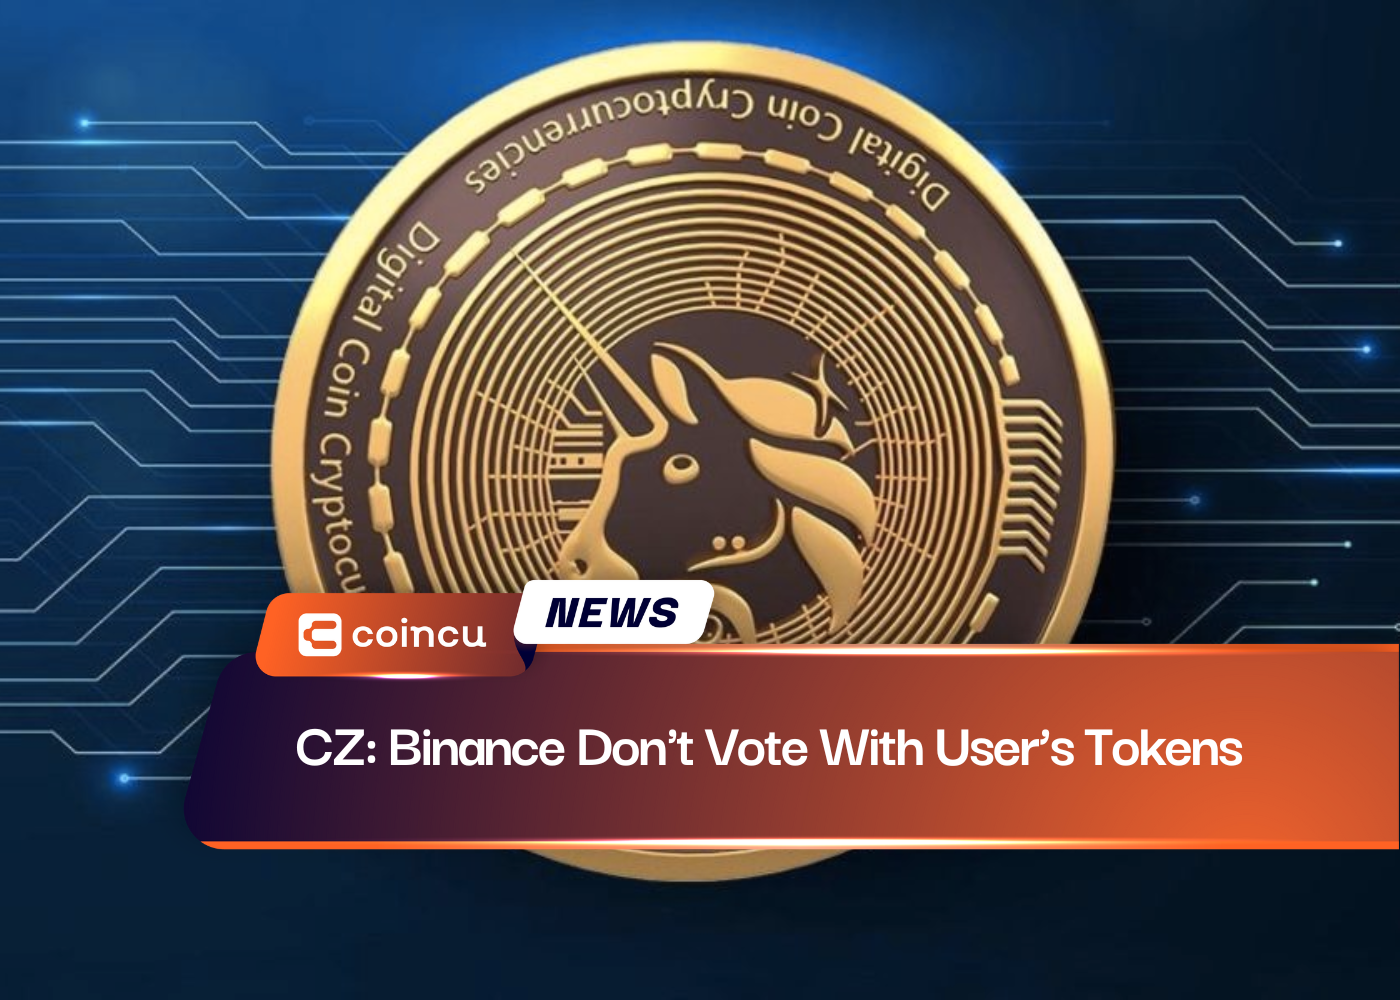 CZ: Binance Don't Vote With User’s Tokens